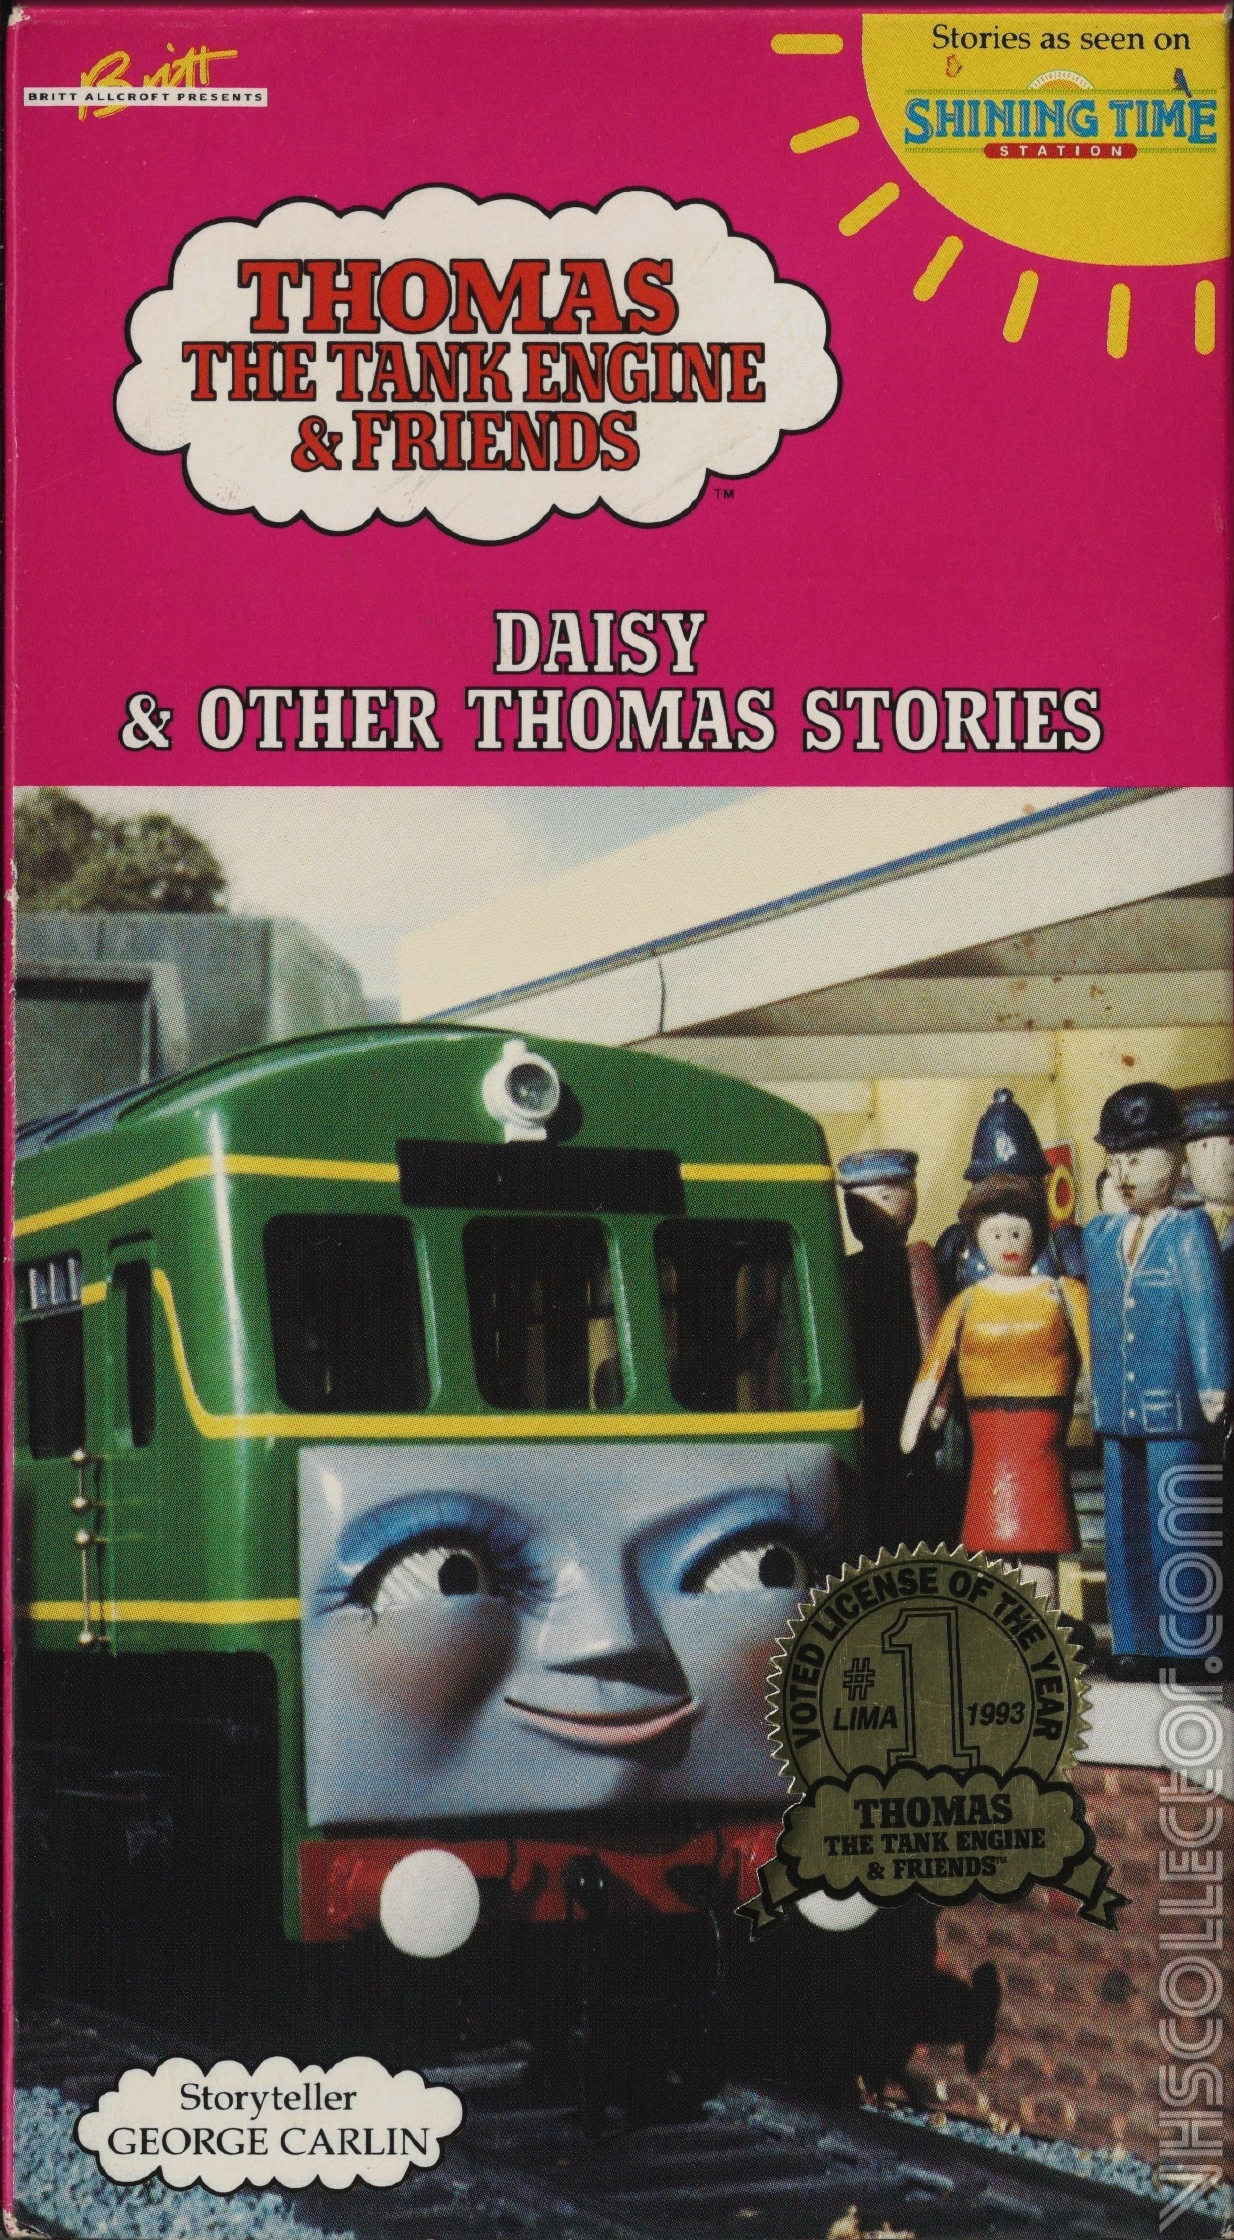 Thomas the Tank Engine and Friends: Daisy | VHSCollector.com